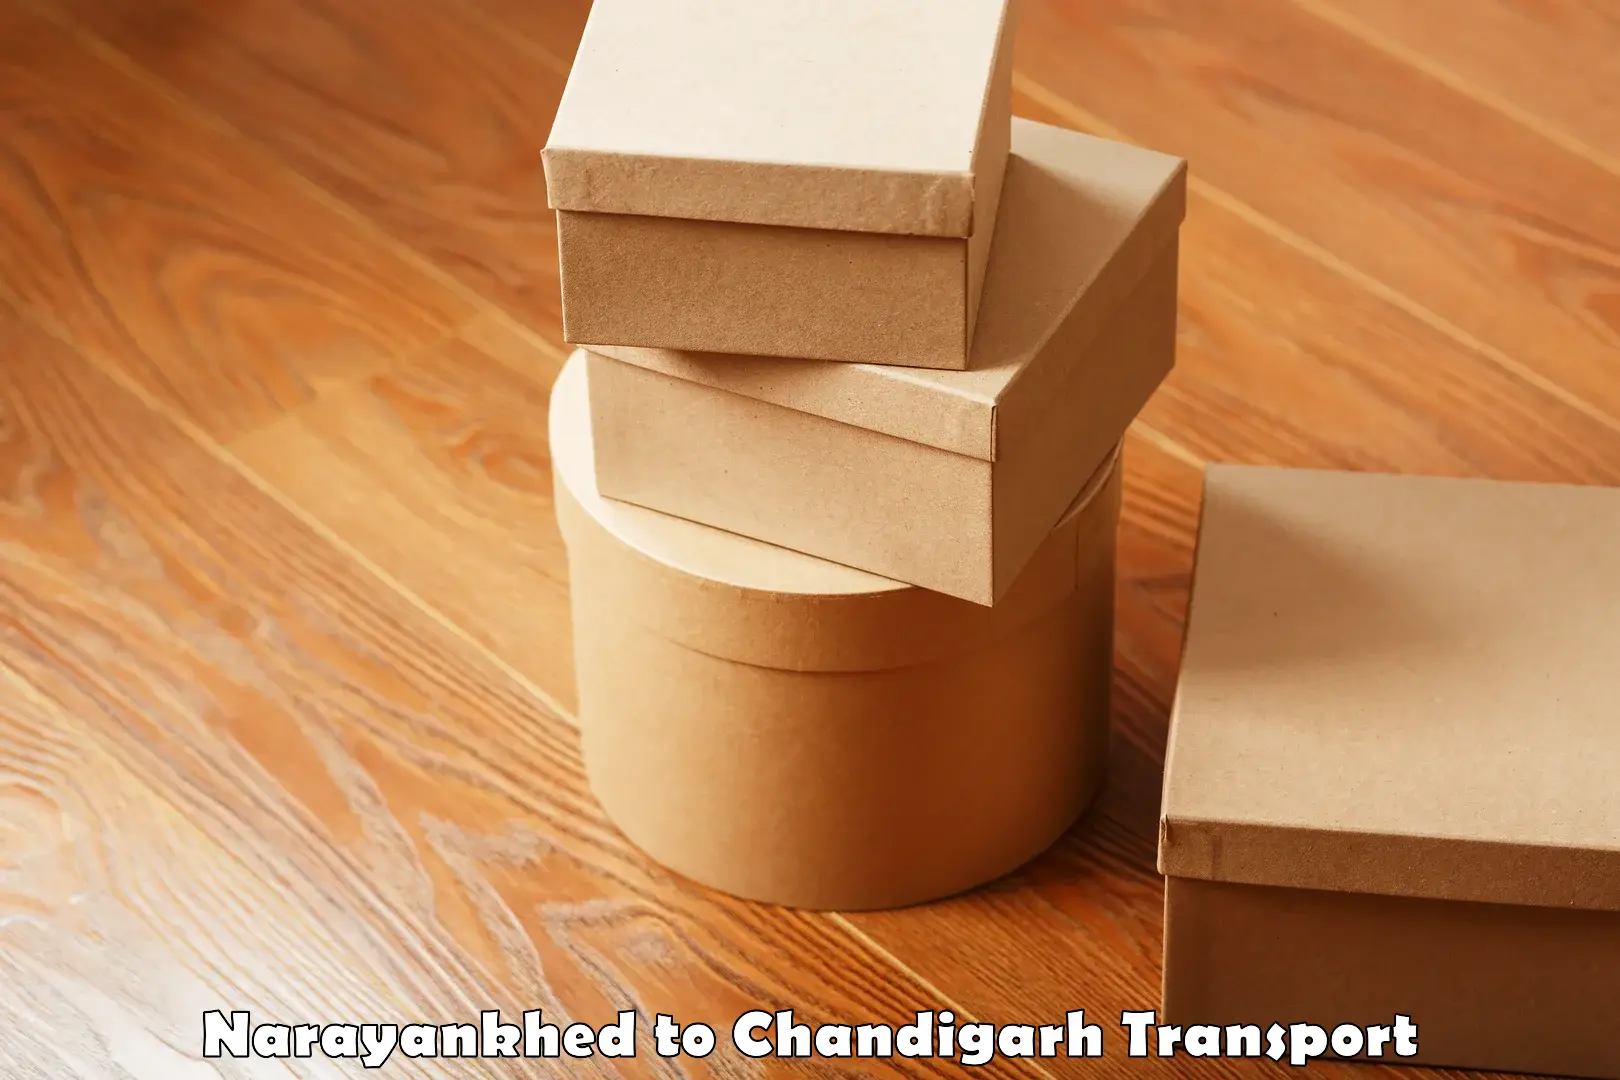 Truck transport companies in India Narayankhed to Chandigarh